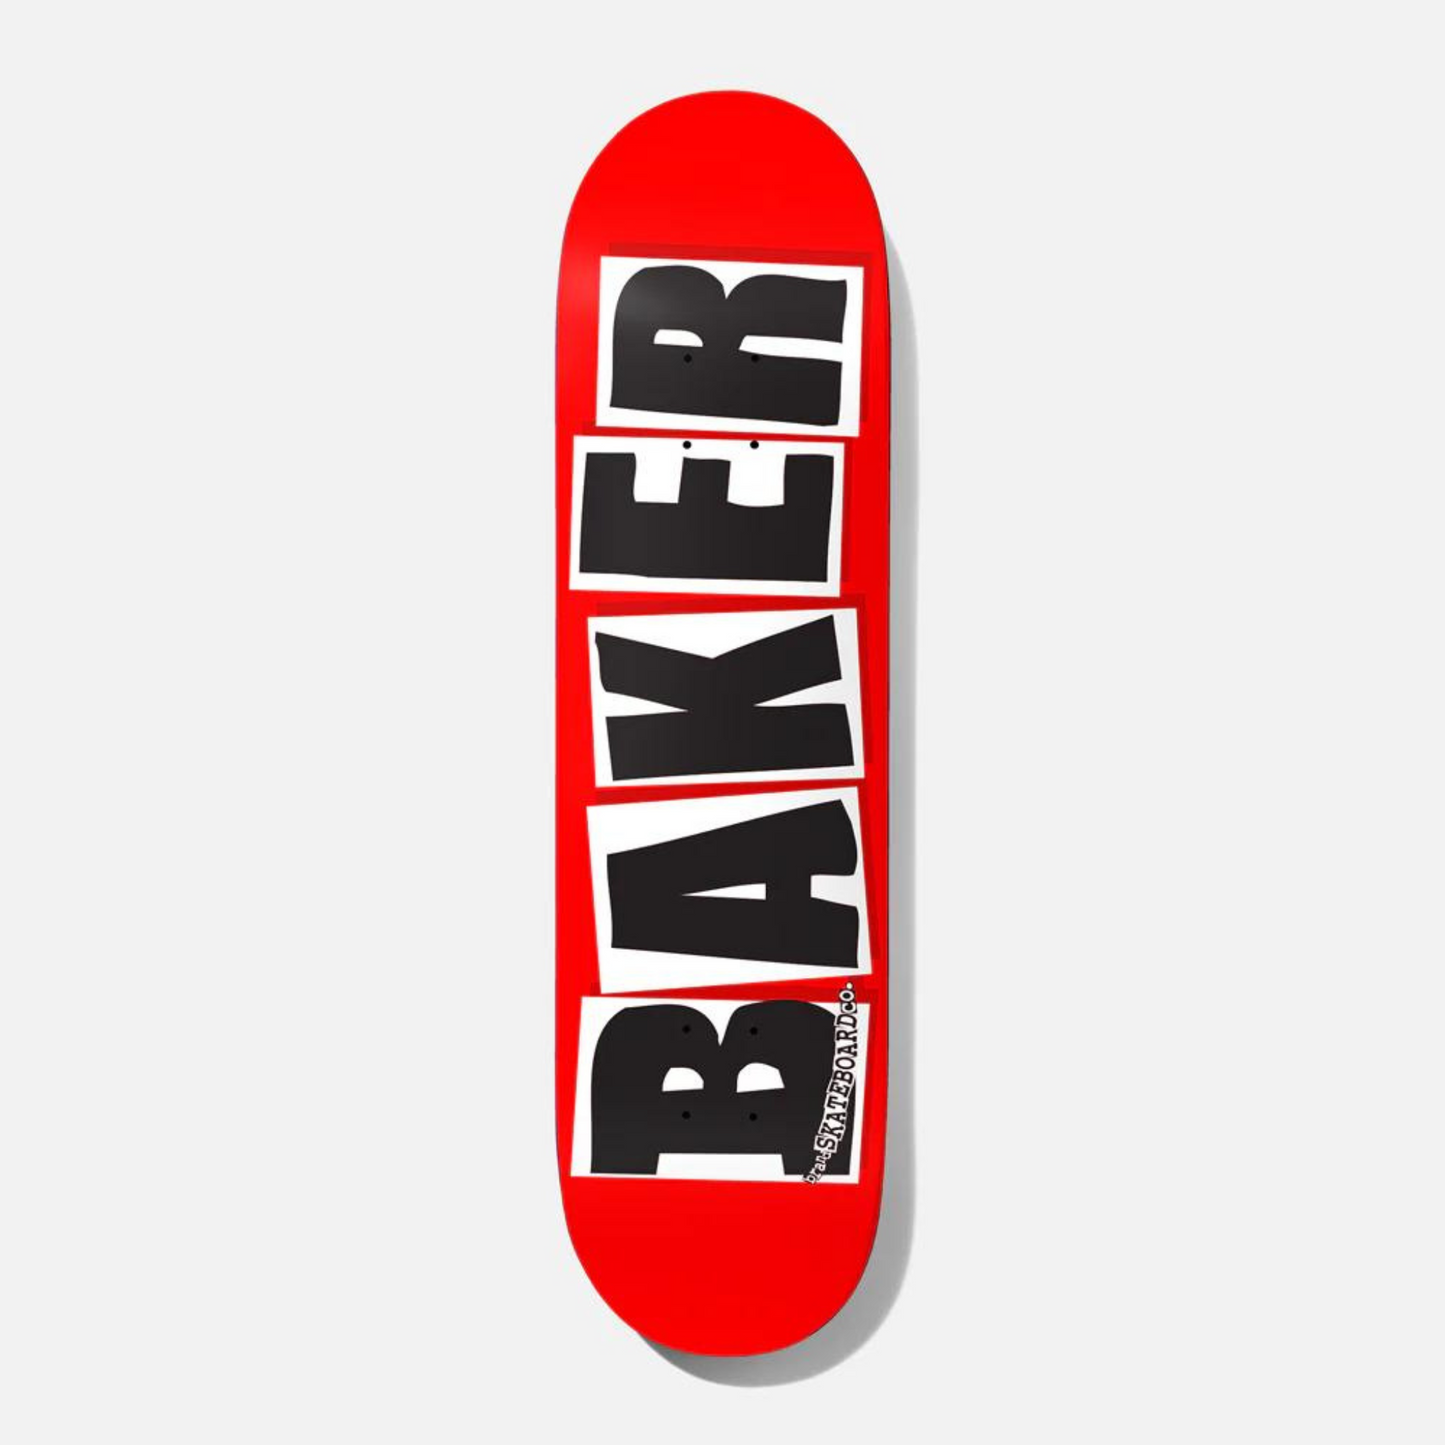 classic baker skateboards brand logo red skateboard  deck with black and white graphic